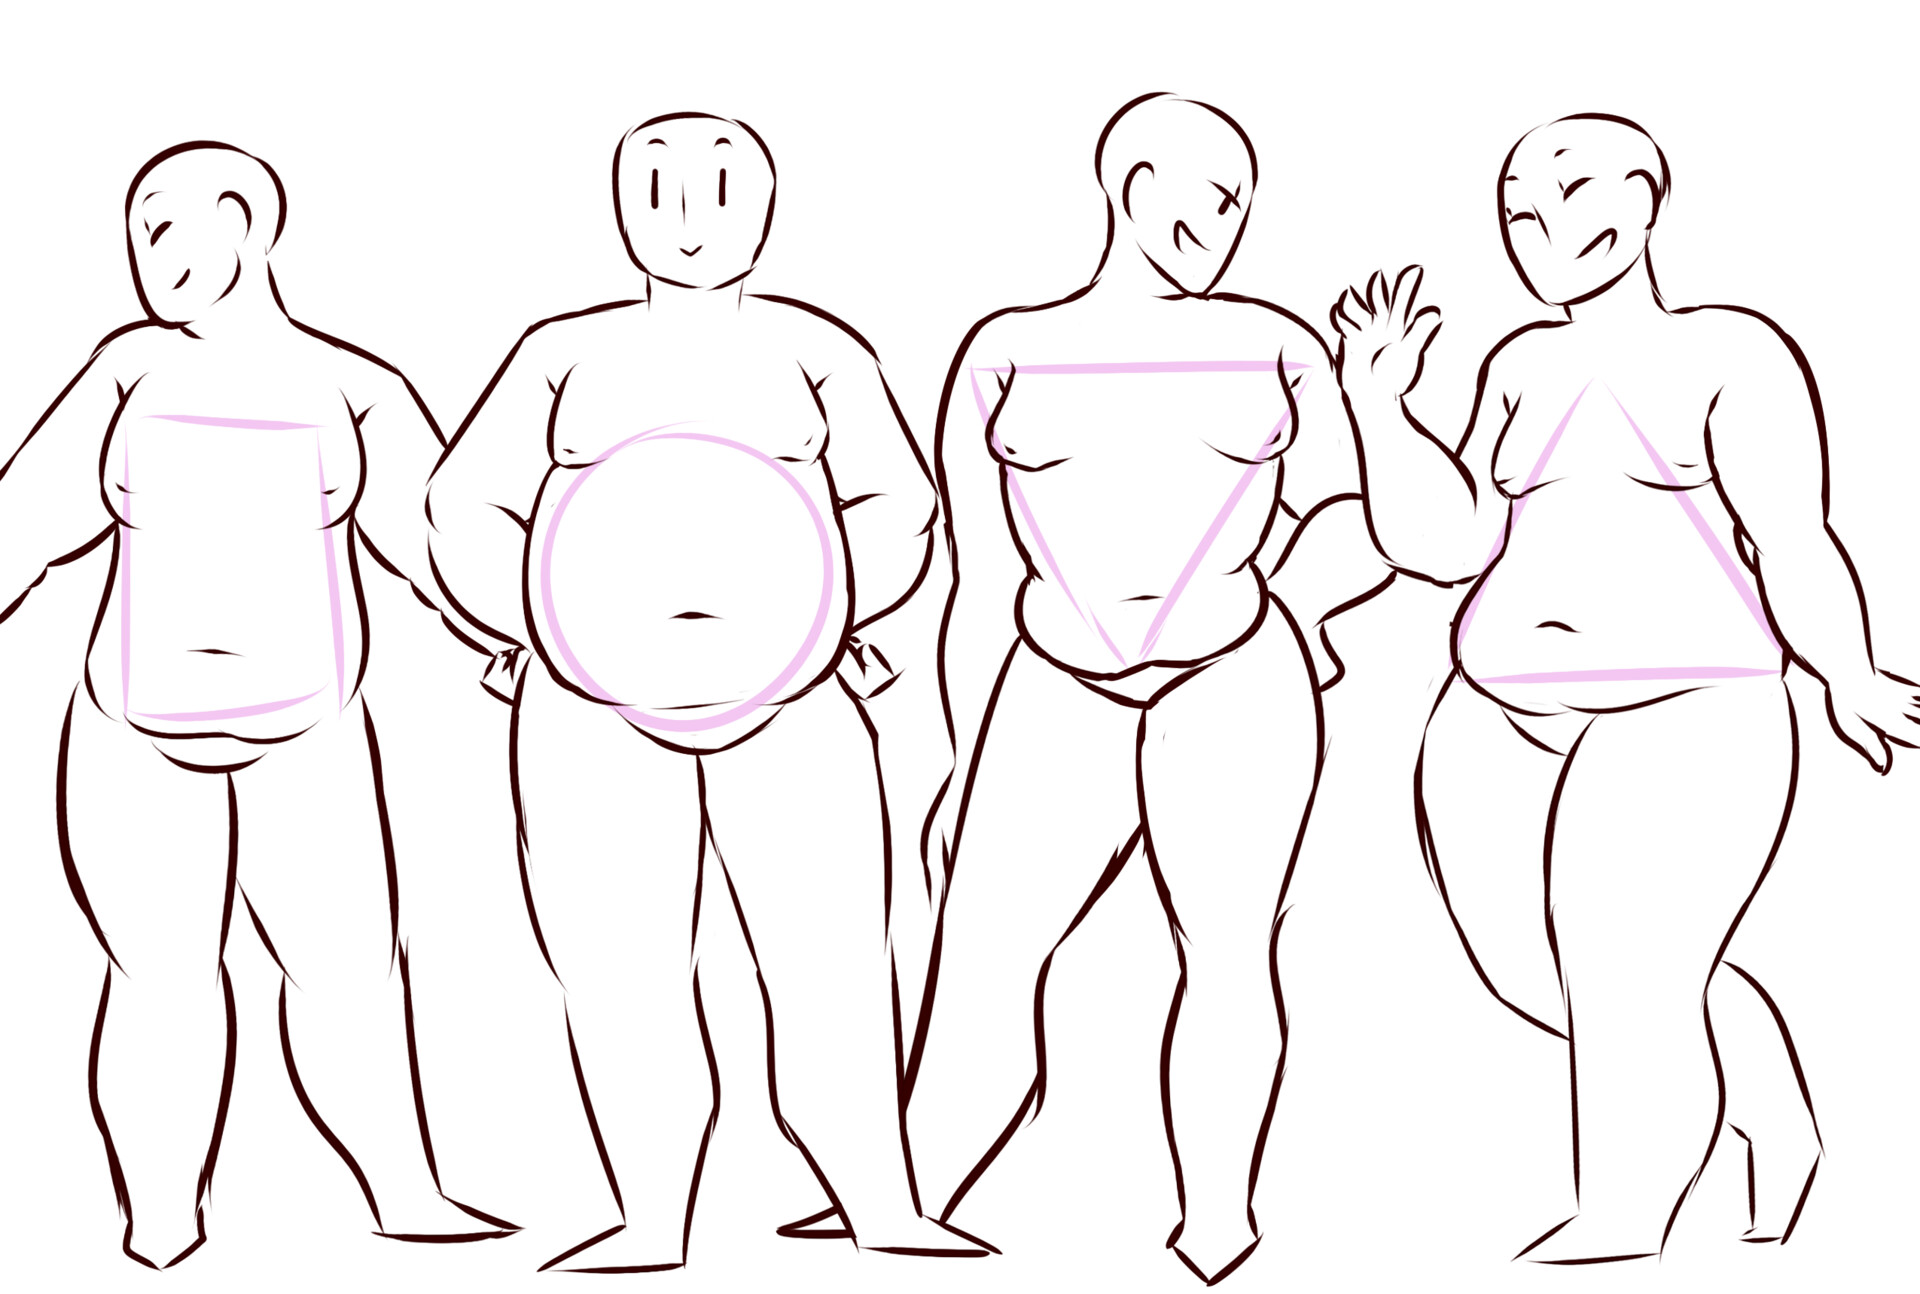 Body type drawing, Body sketches, Poses